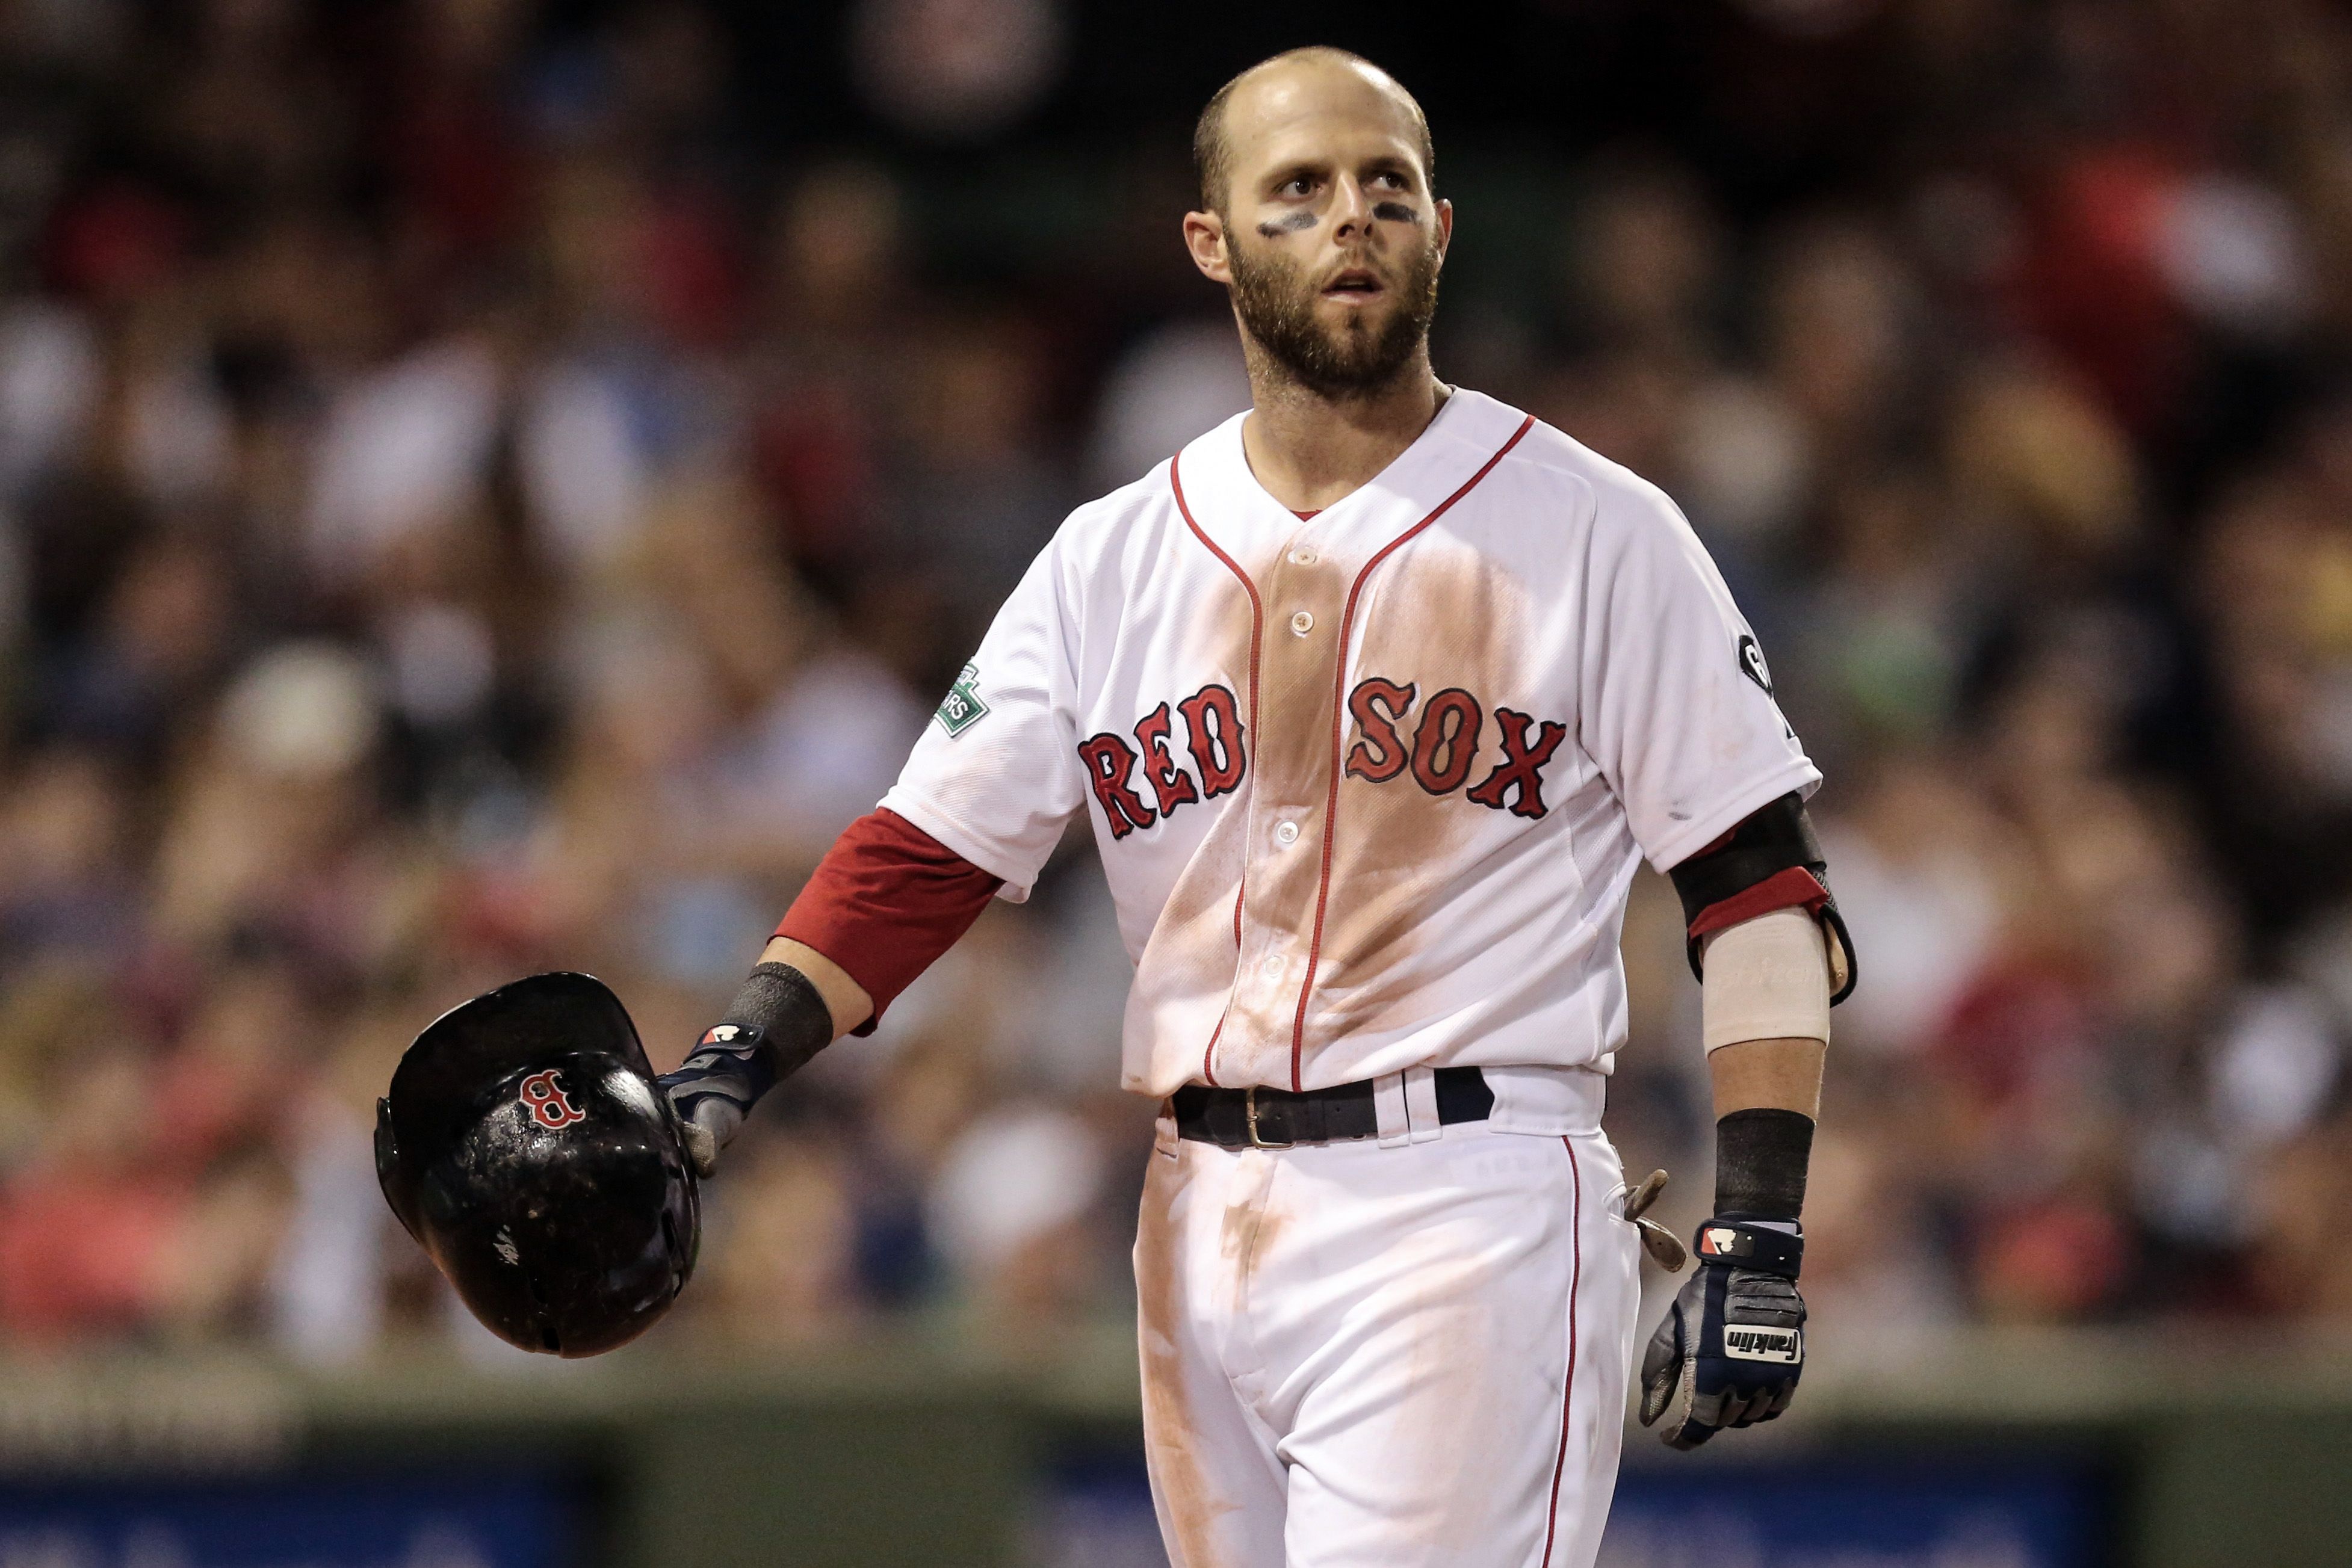 Dustin Pedroia appears to sustain injury in second base collision